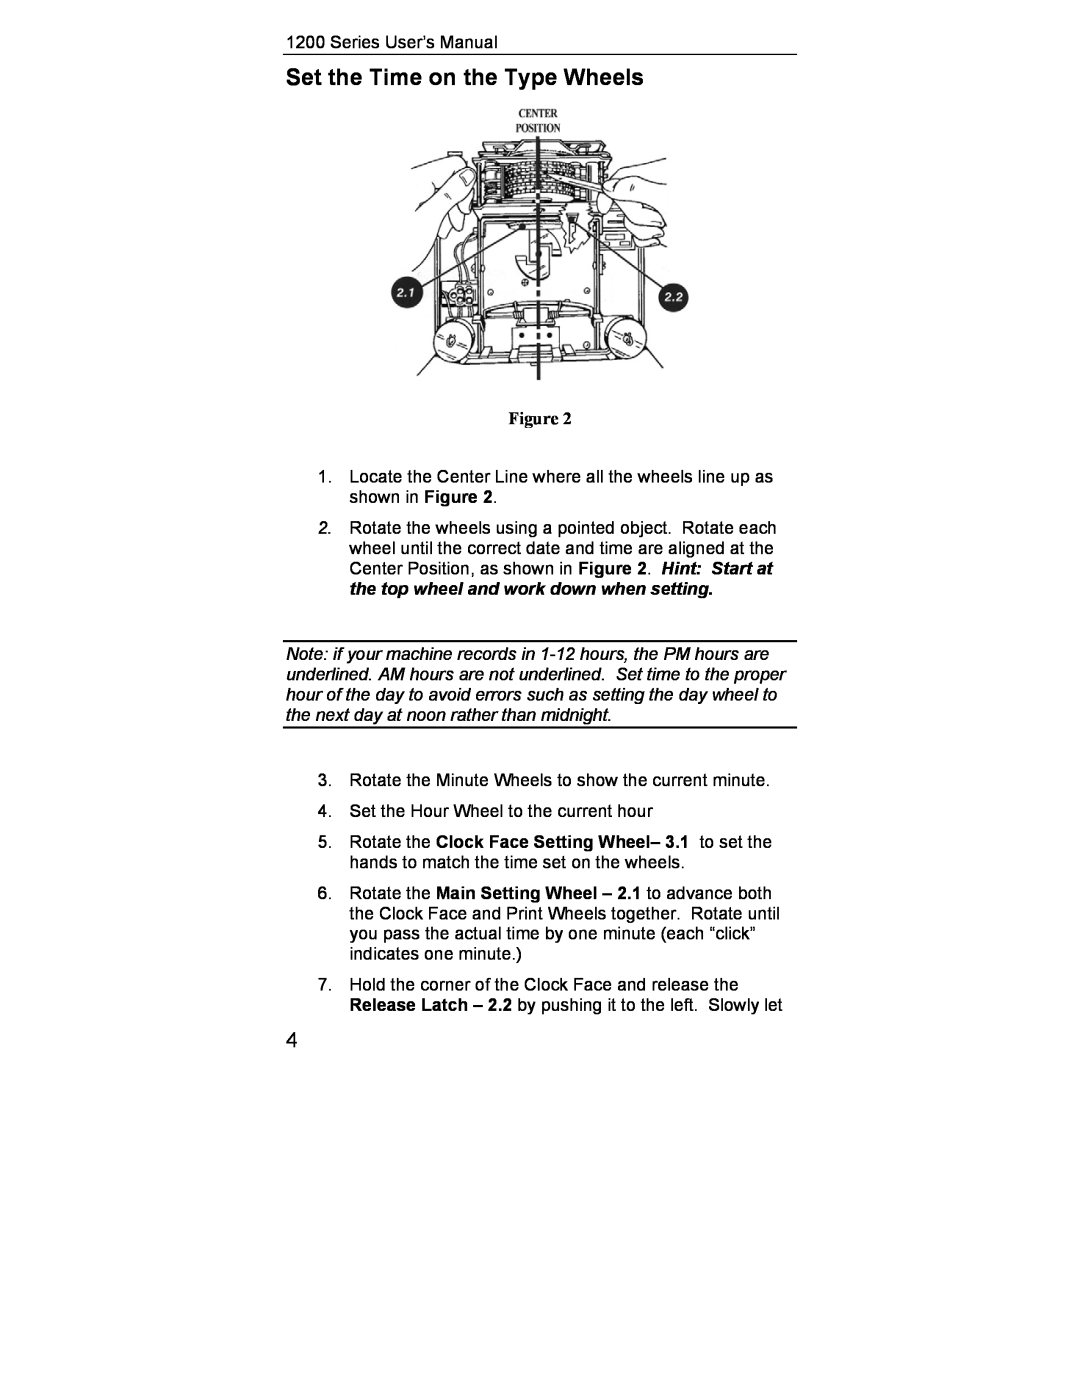 Lathem 1200 Series user manual Set the Time on the Type Wheels 